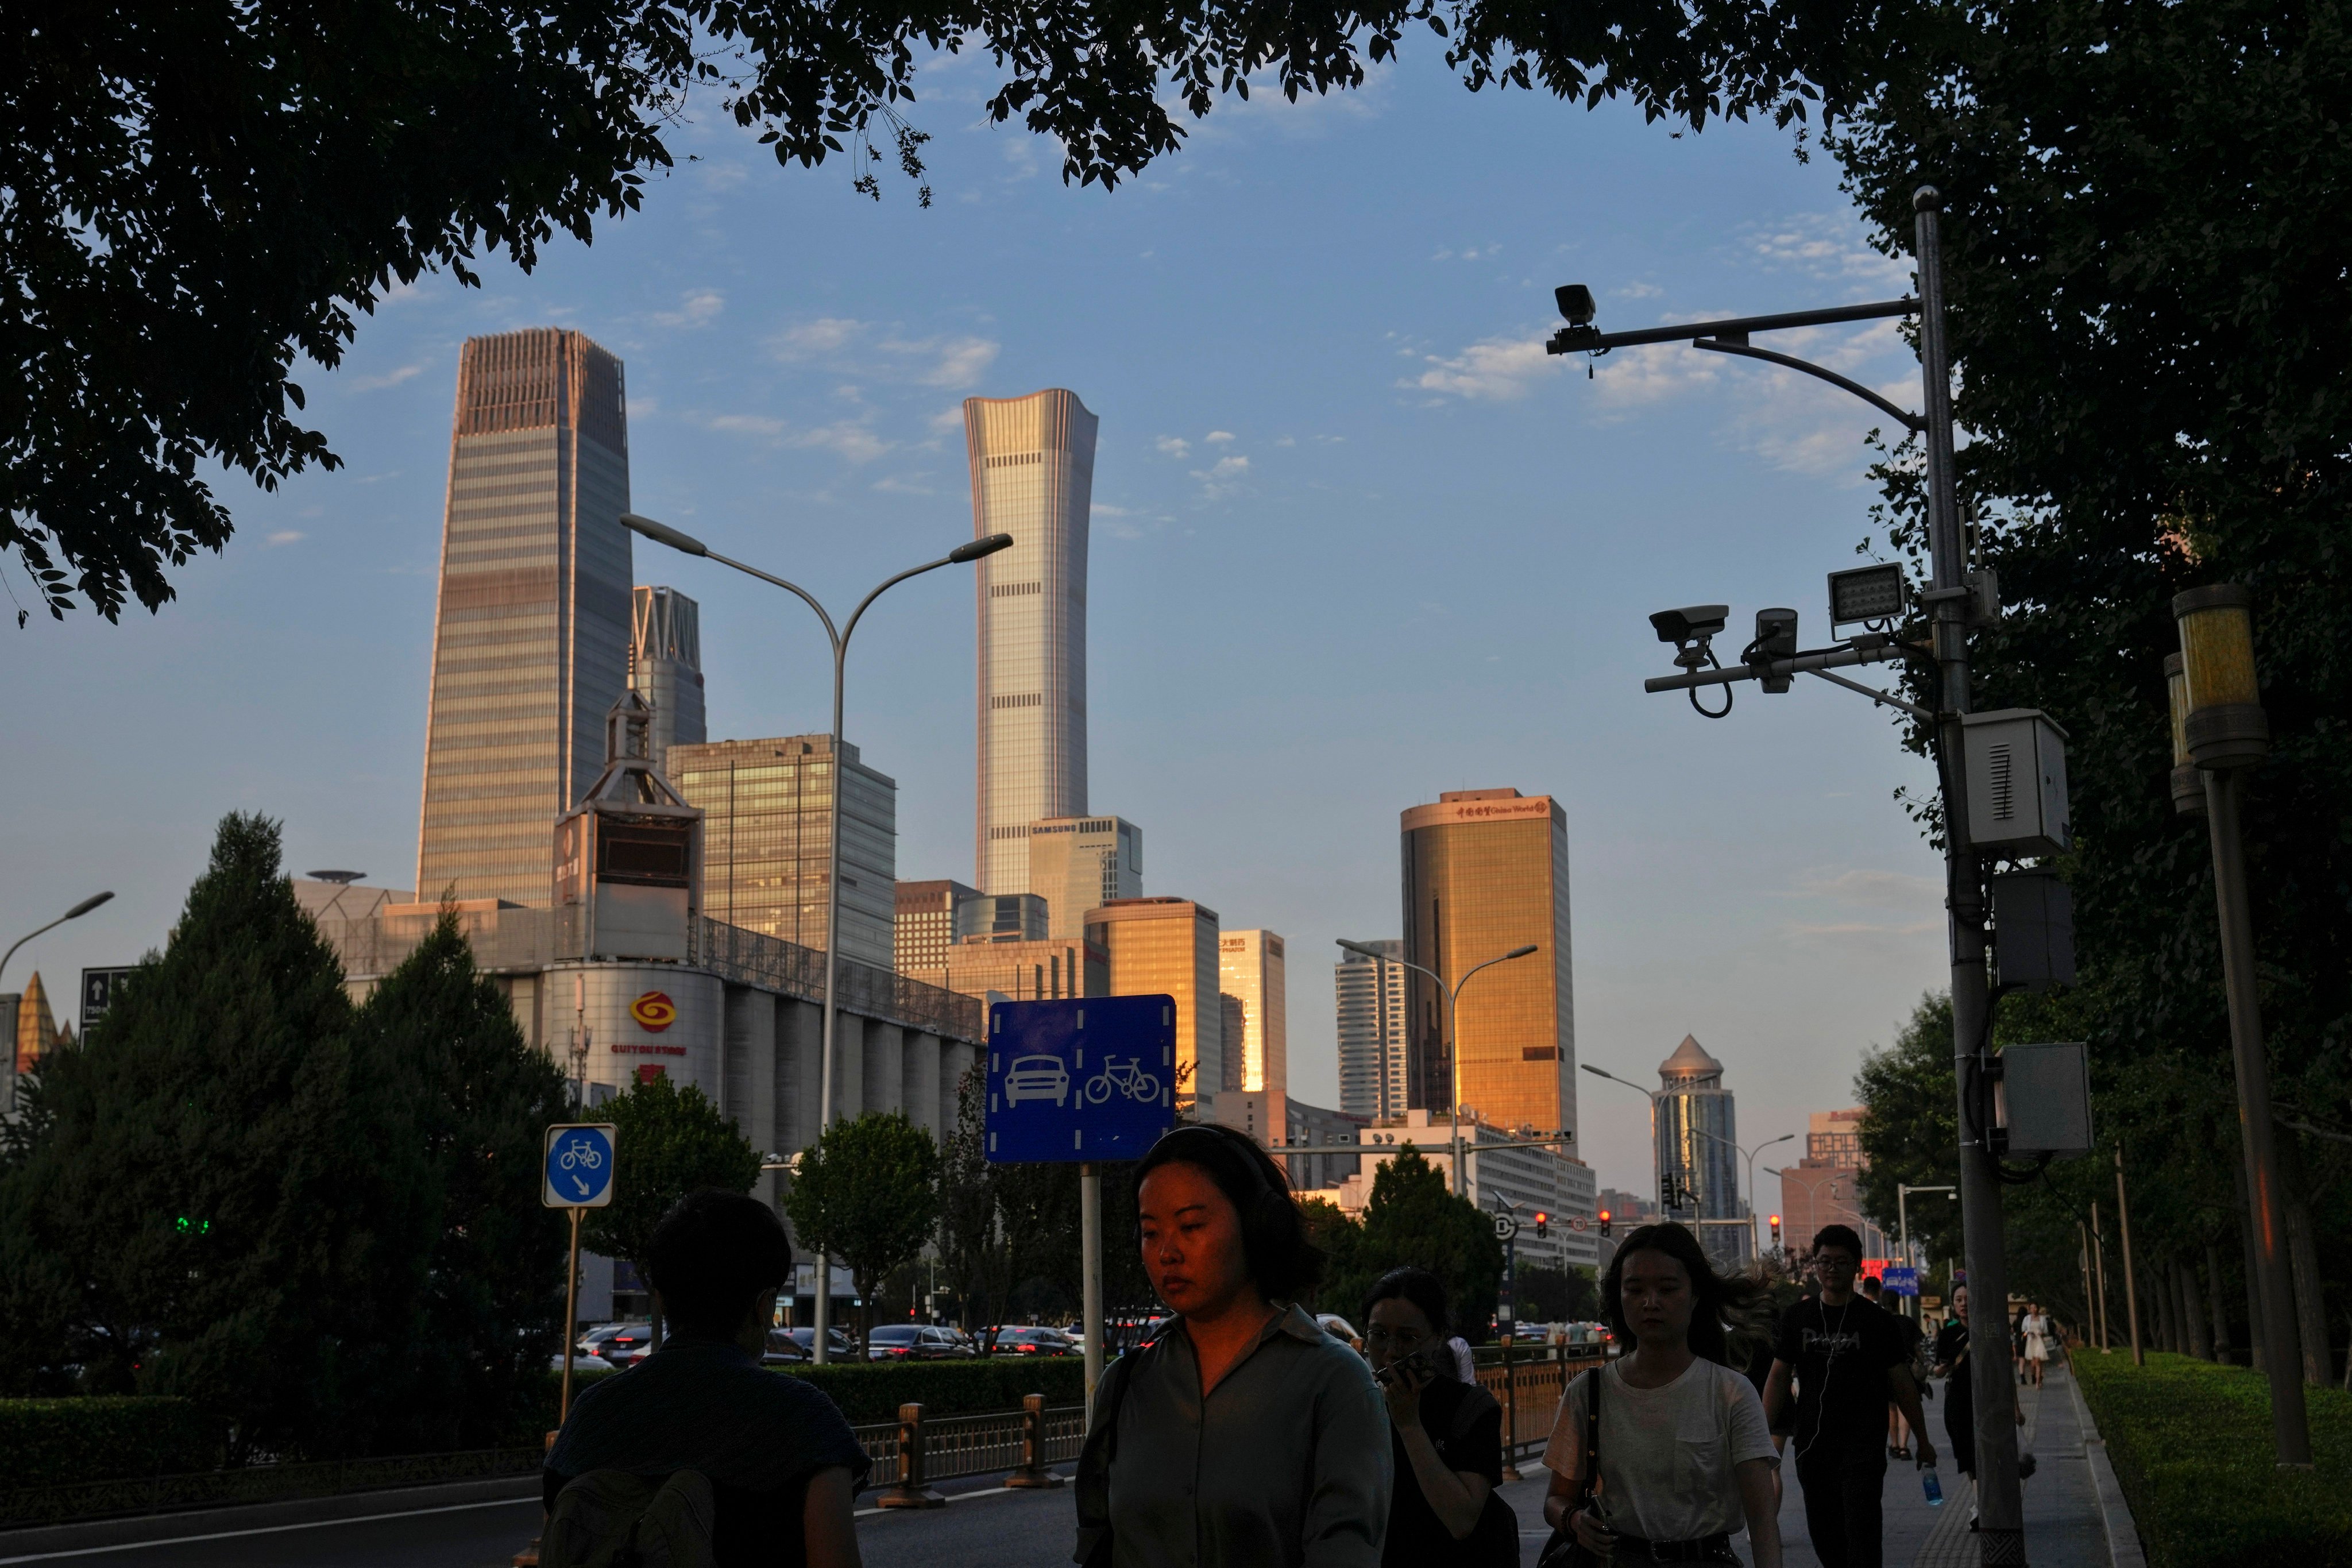 Beijing’s central business district. The city offers visitors a stark contrast between historic neighbourhoods and its urban business district, IWG says. Photo: AP